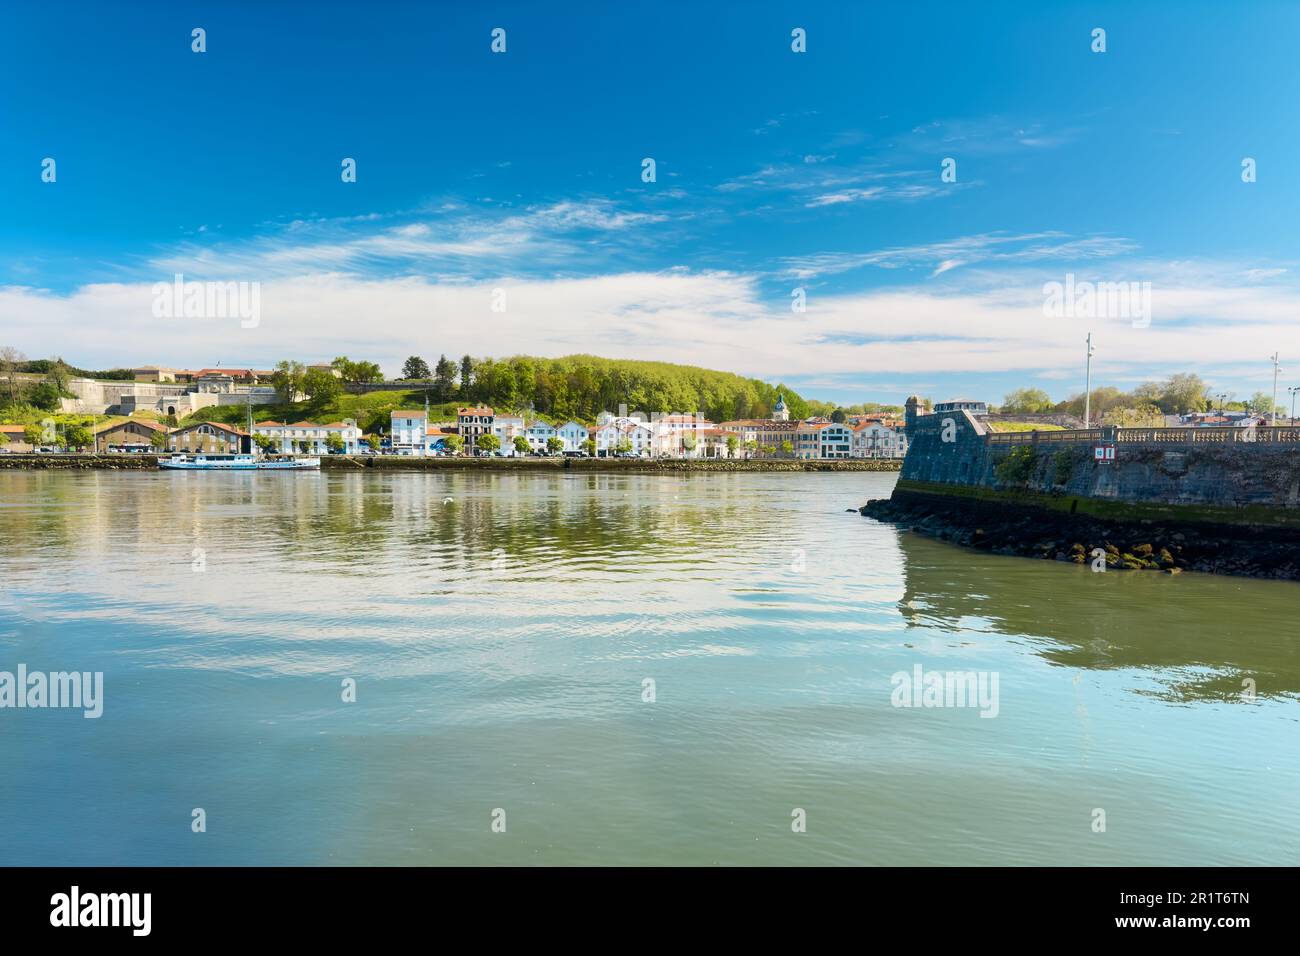 View from Bayonne on the Adour river. Bayonne is a city located in southern France. High quality photography Stock Photo